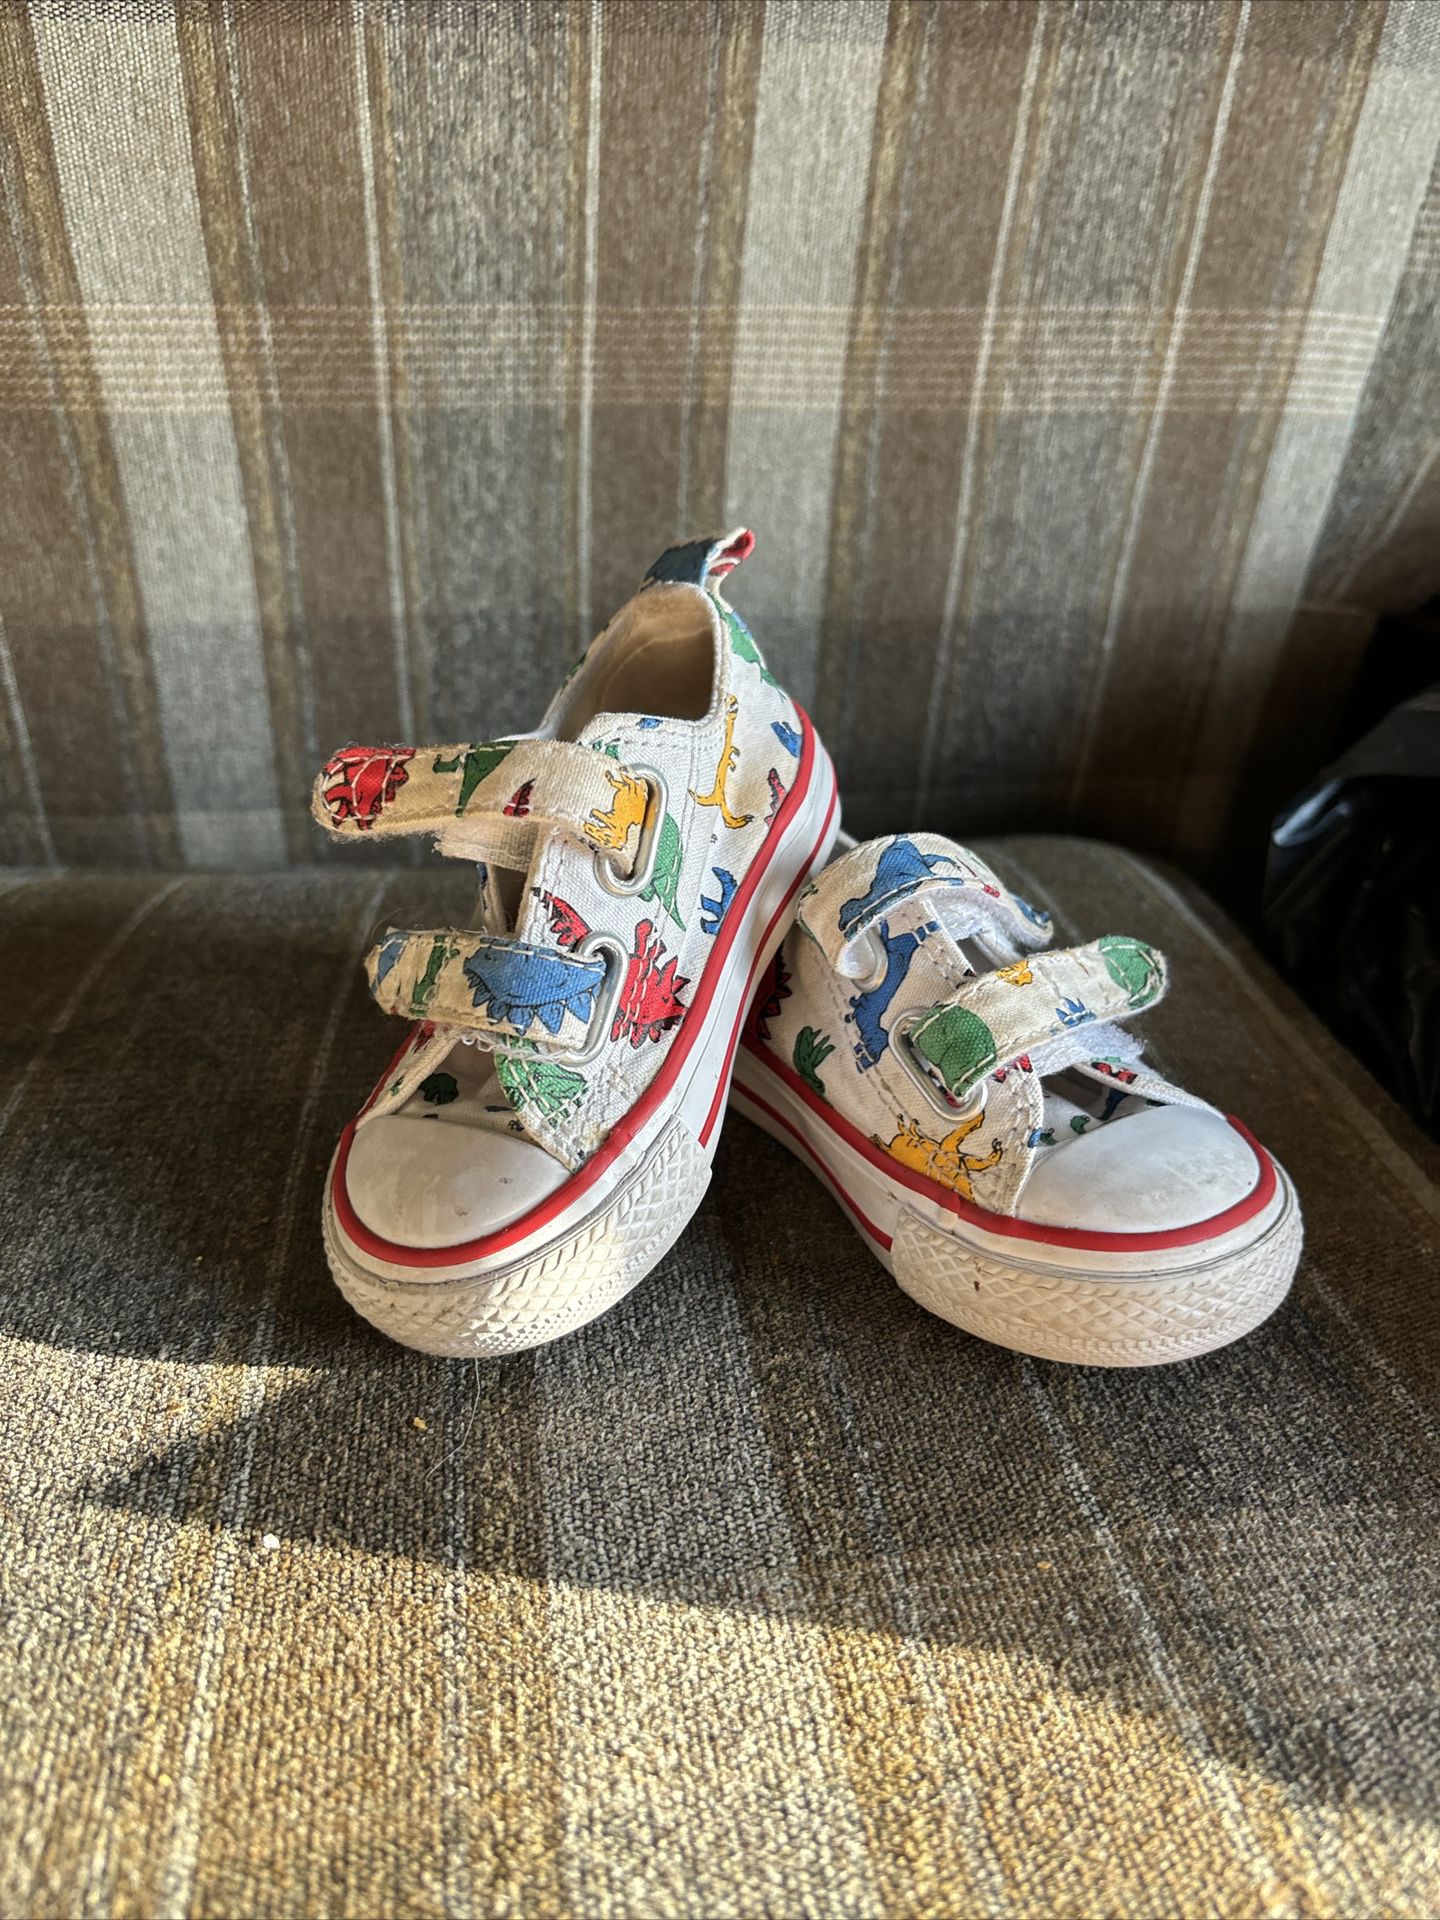 Converse Chuck Taylor All Star Dinosaur Sneakers Toddler Boys Size 3